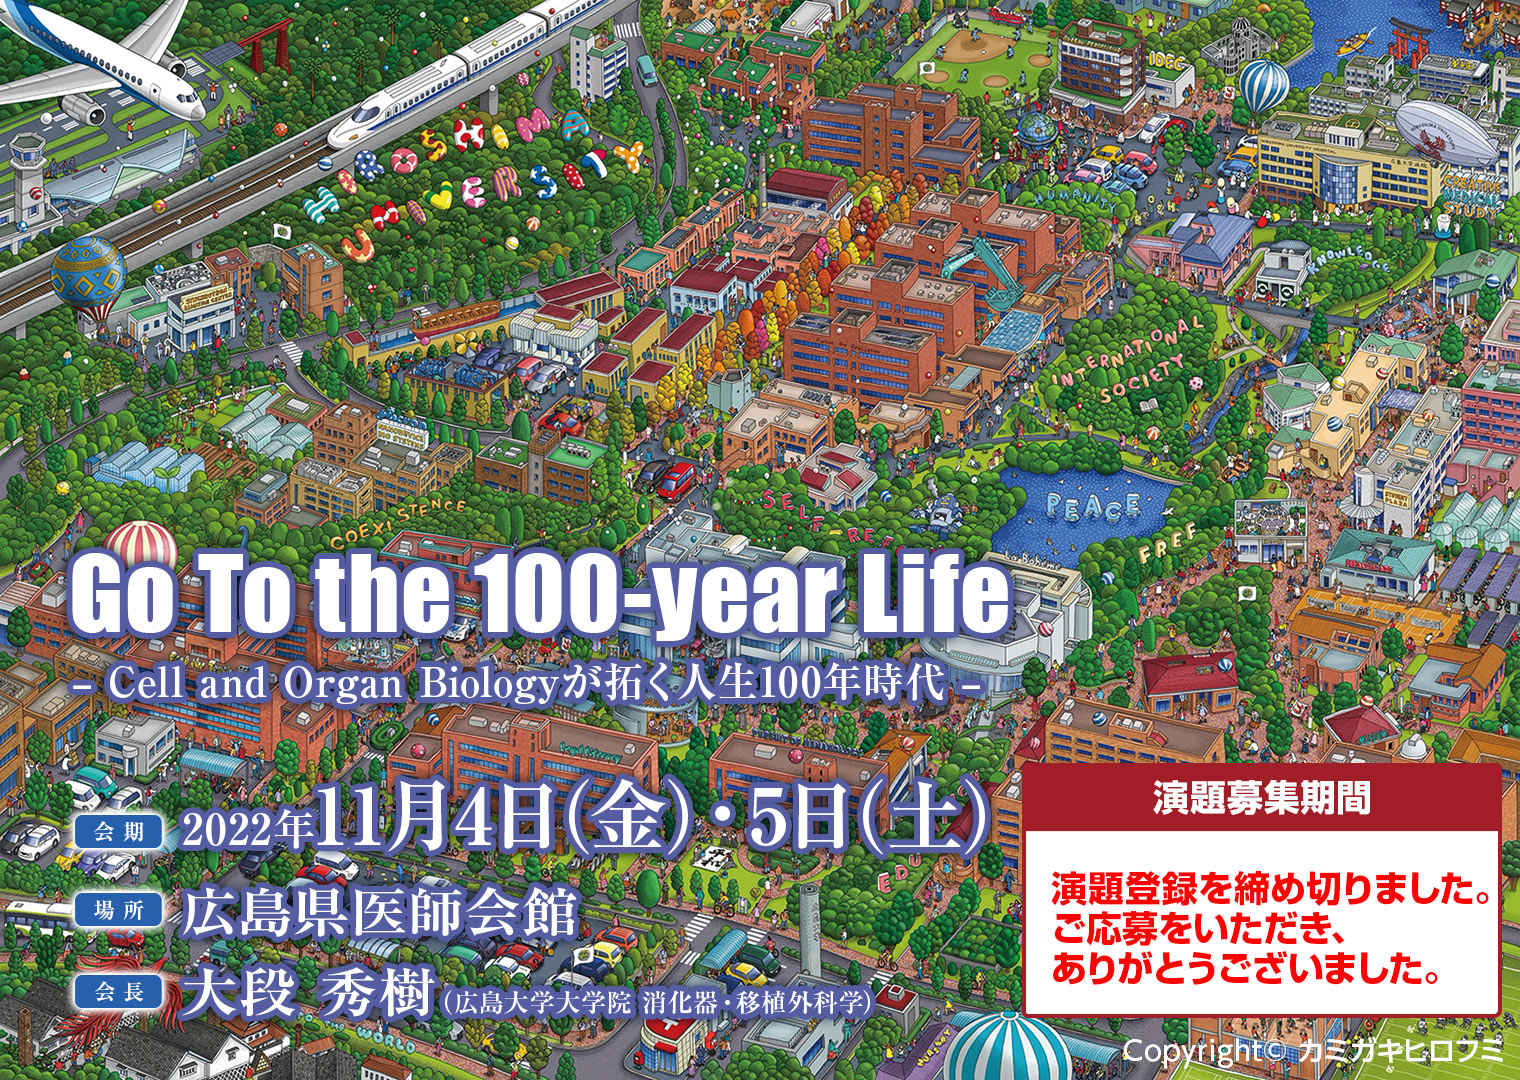 Go To the 100-year Life「Cell and Organ Biologyが拓く人生100年時代」